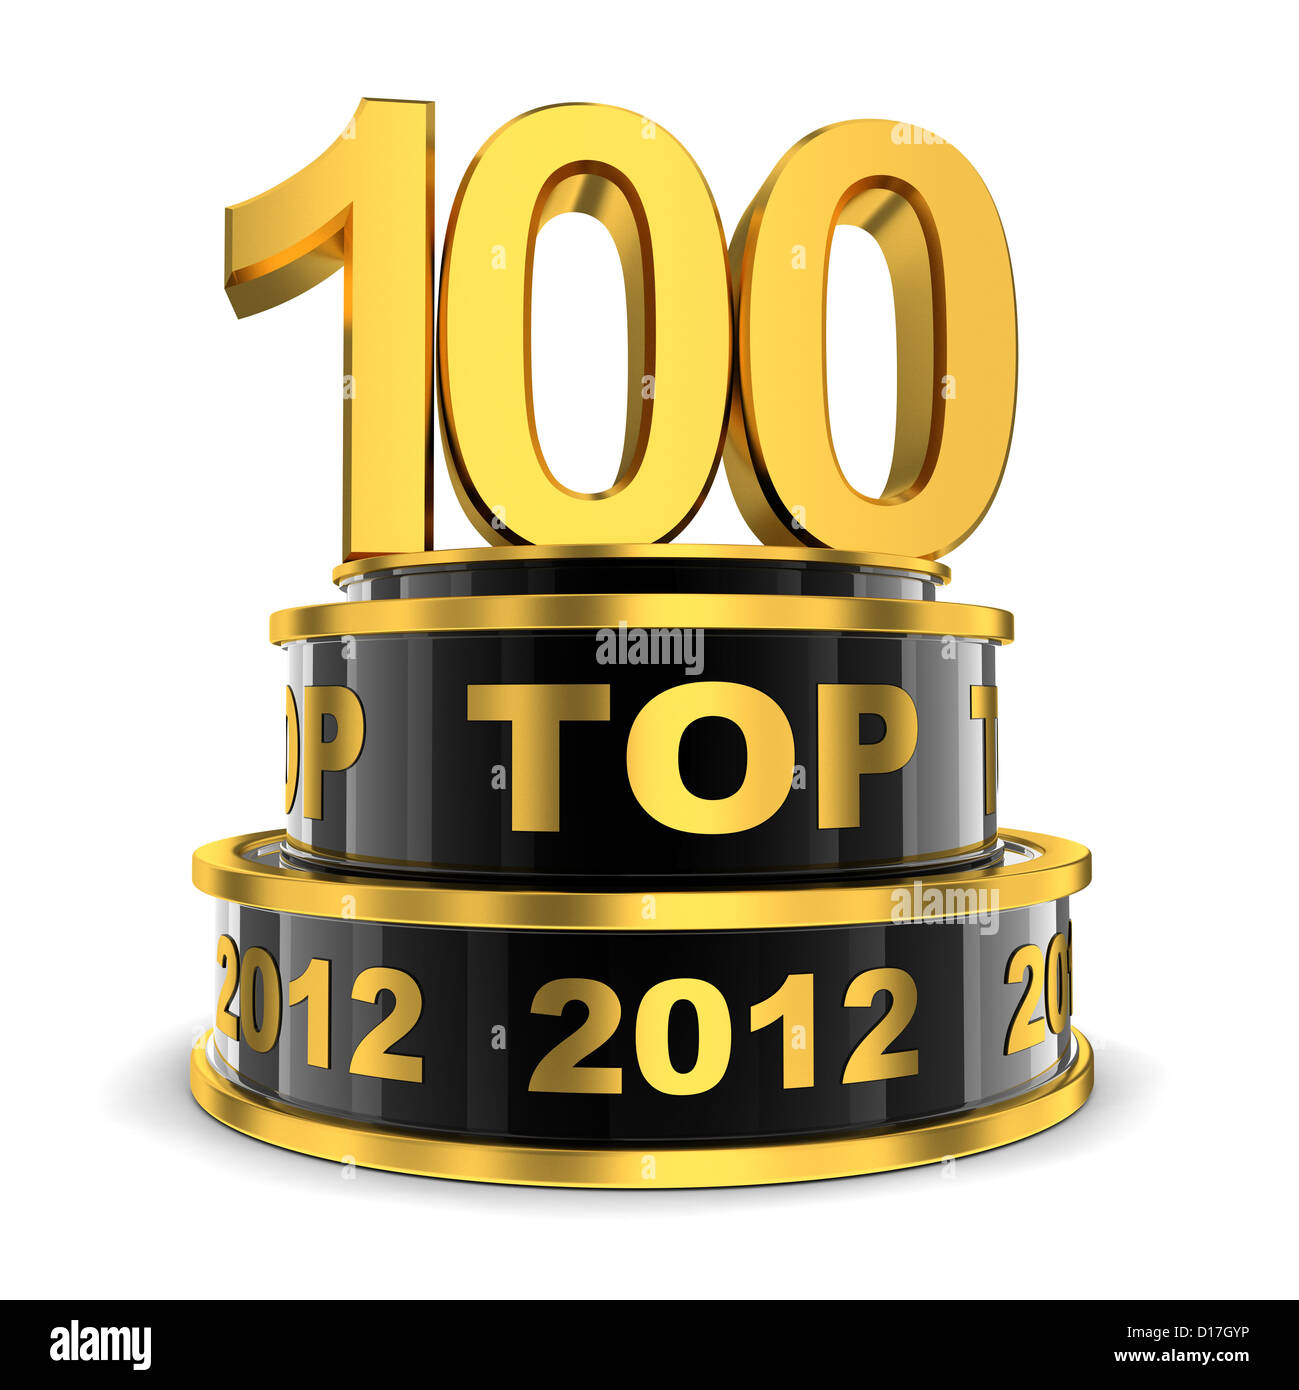 Top 100 of the year (done in 3d) Stock Photo